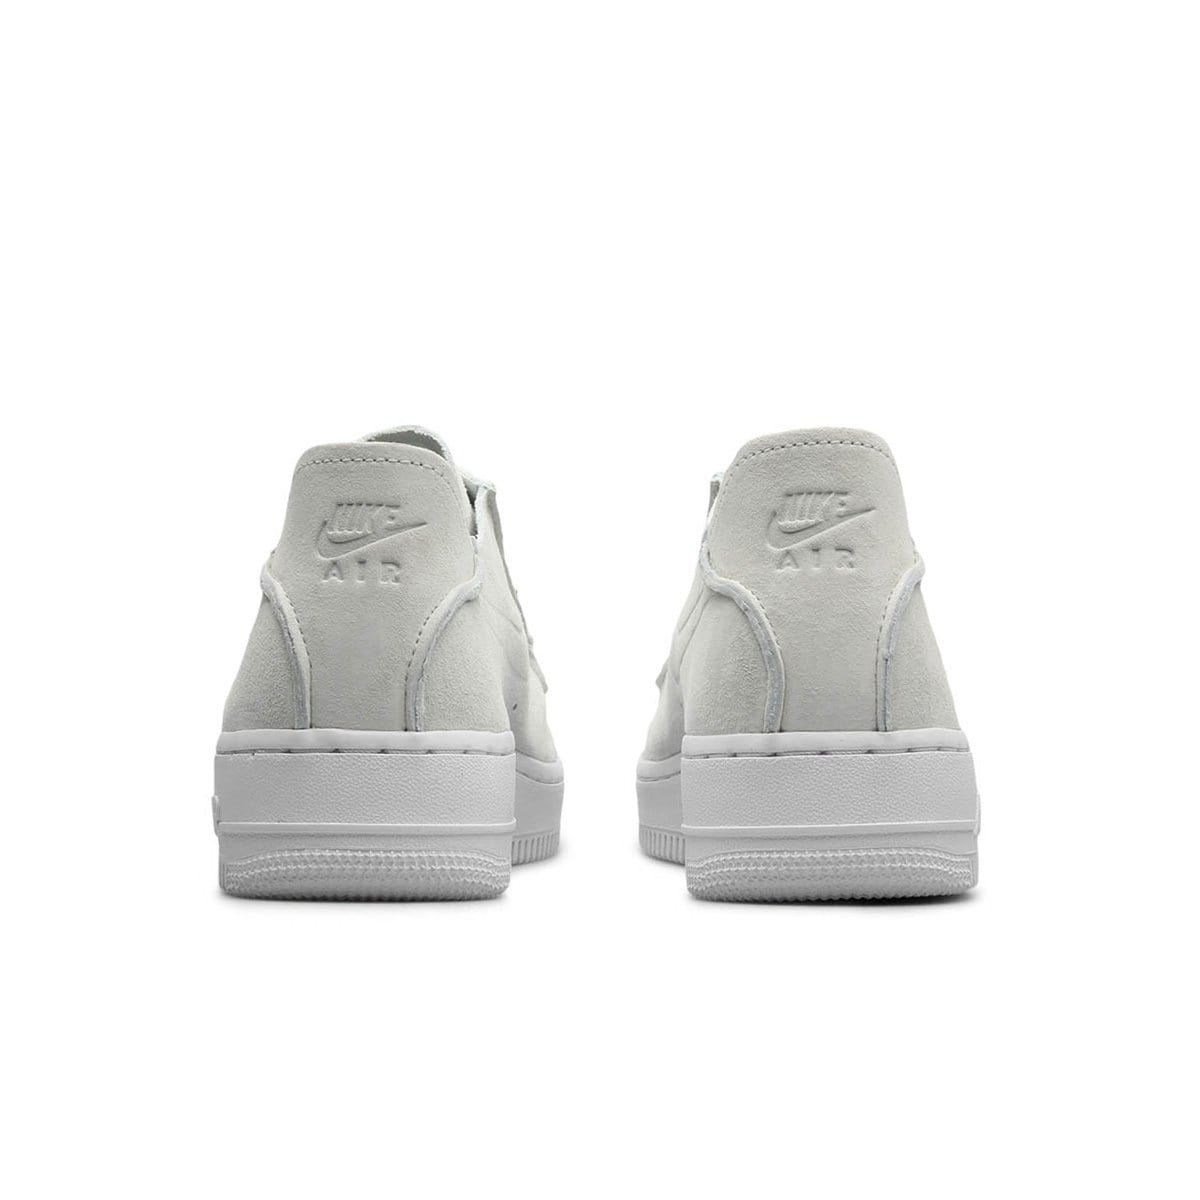 womens air force 1 deconstructed